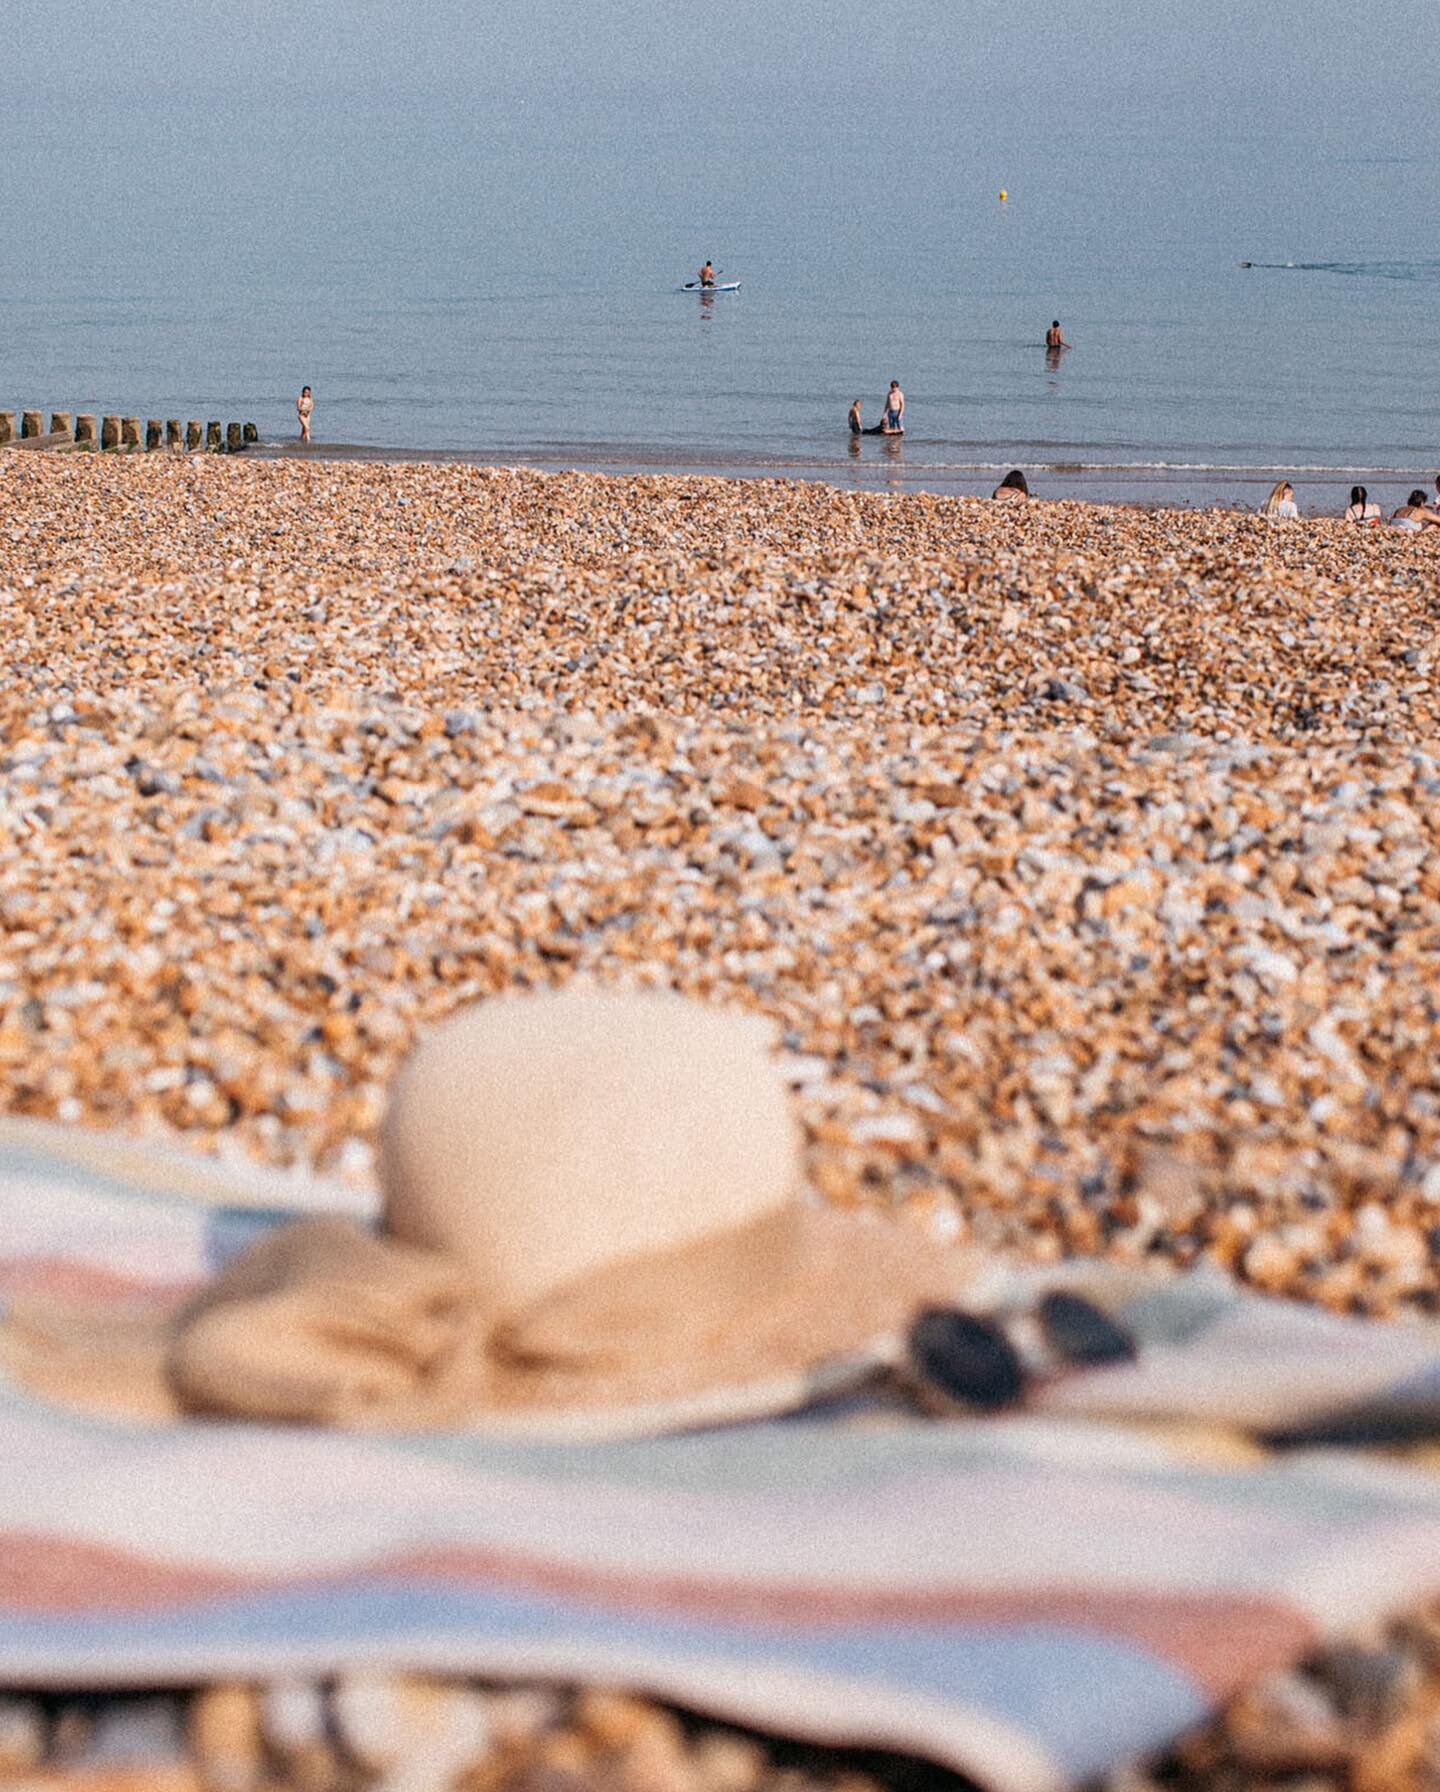 We&rsquo;re all set for a sunny weekend with our deckchairs out and sun-hats on!&nbsp;
&nbsp;
Book a #stayatport if you do like to be beside the seaside 🌊🖤
&nbsp;
With rooms from only &pound;89 when you book direct.&nbsp;
&nbsp;
Images by @emmacrom